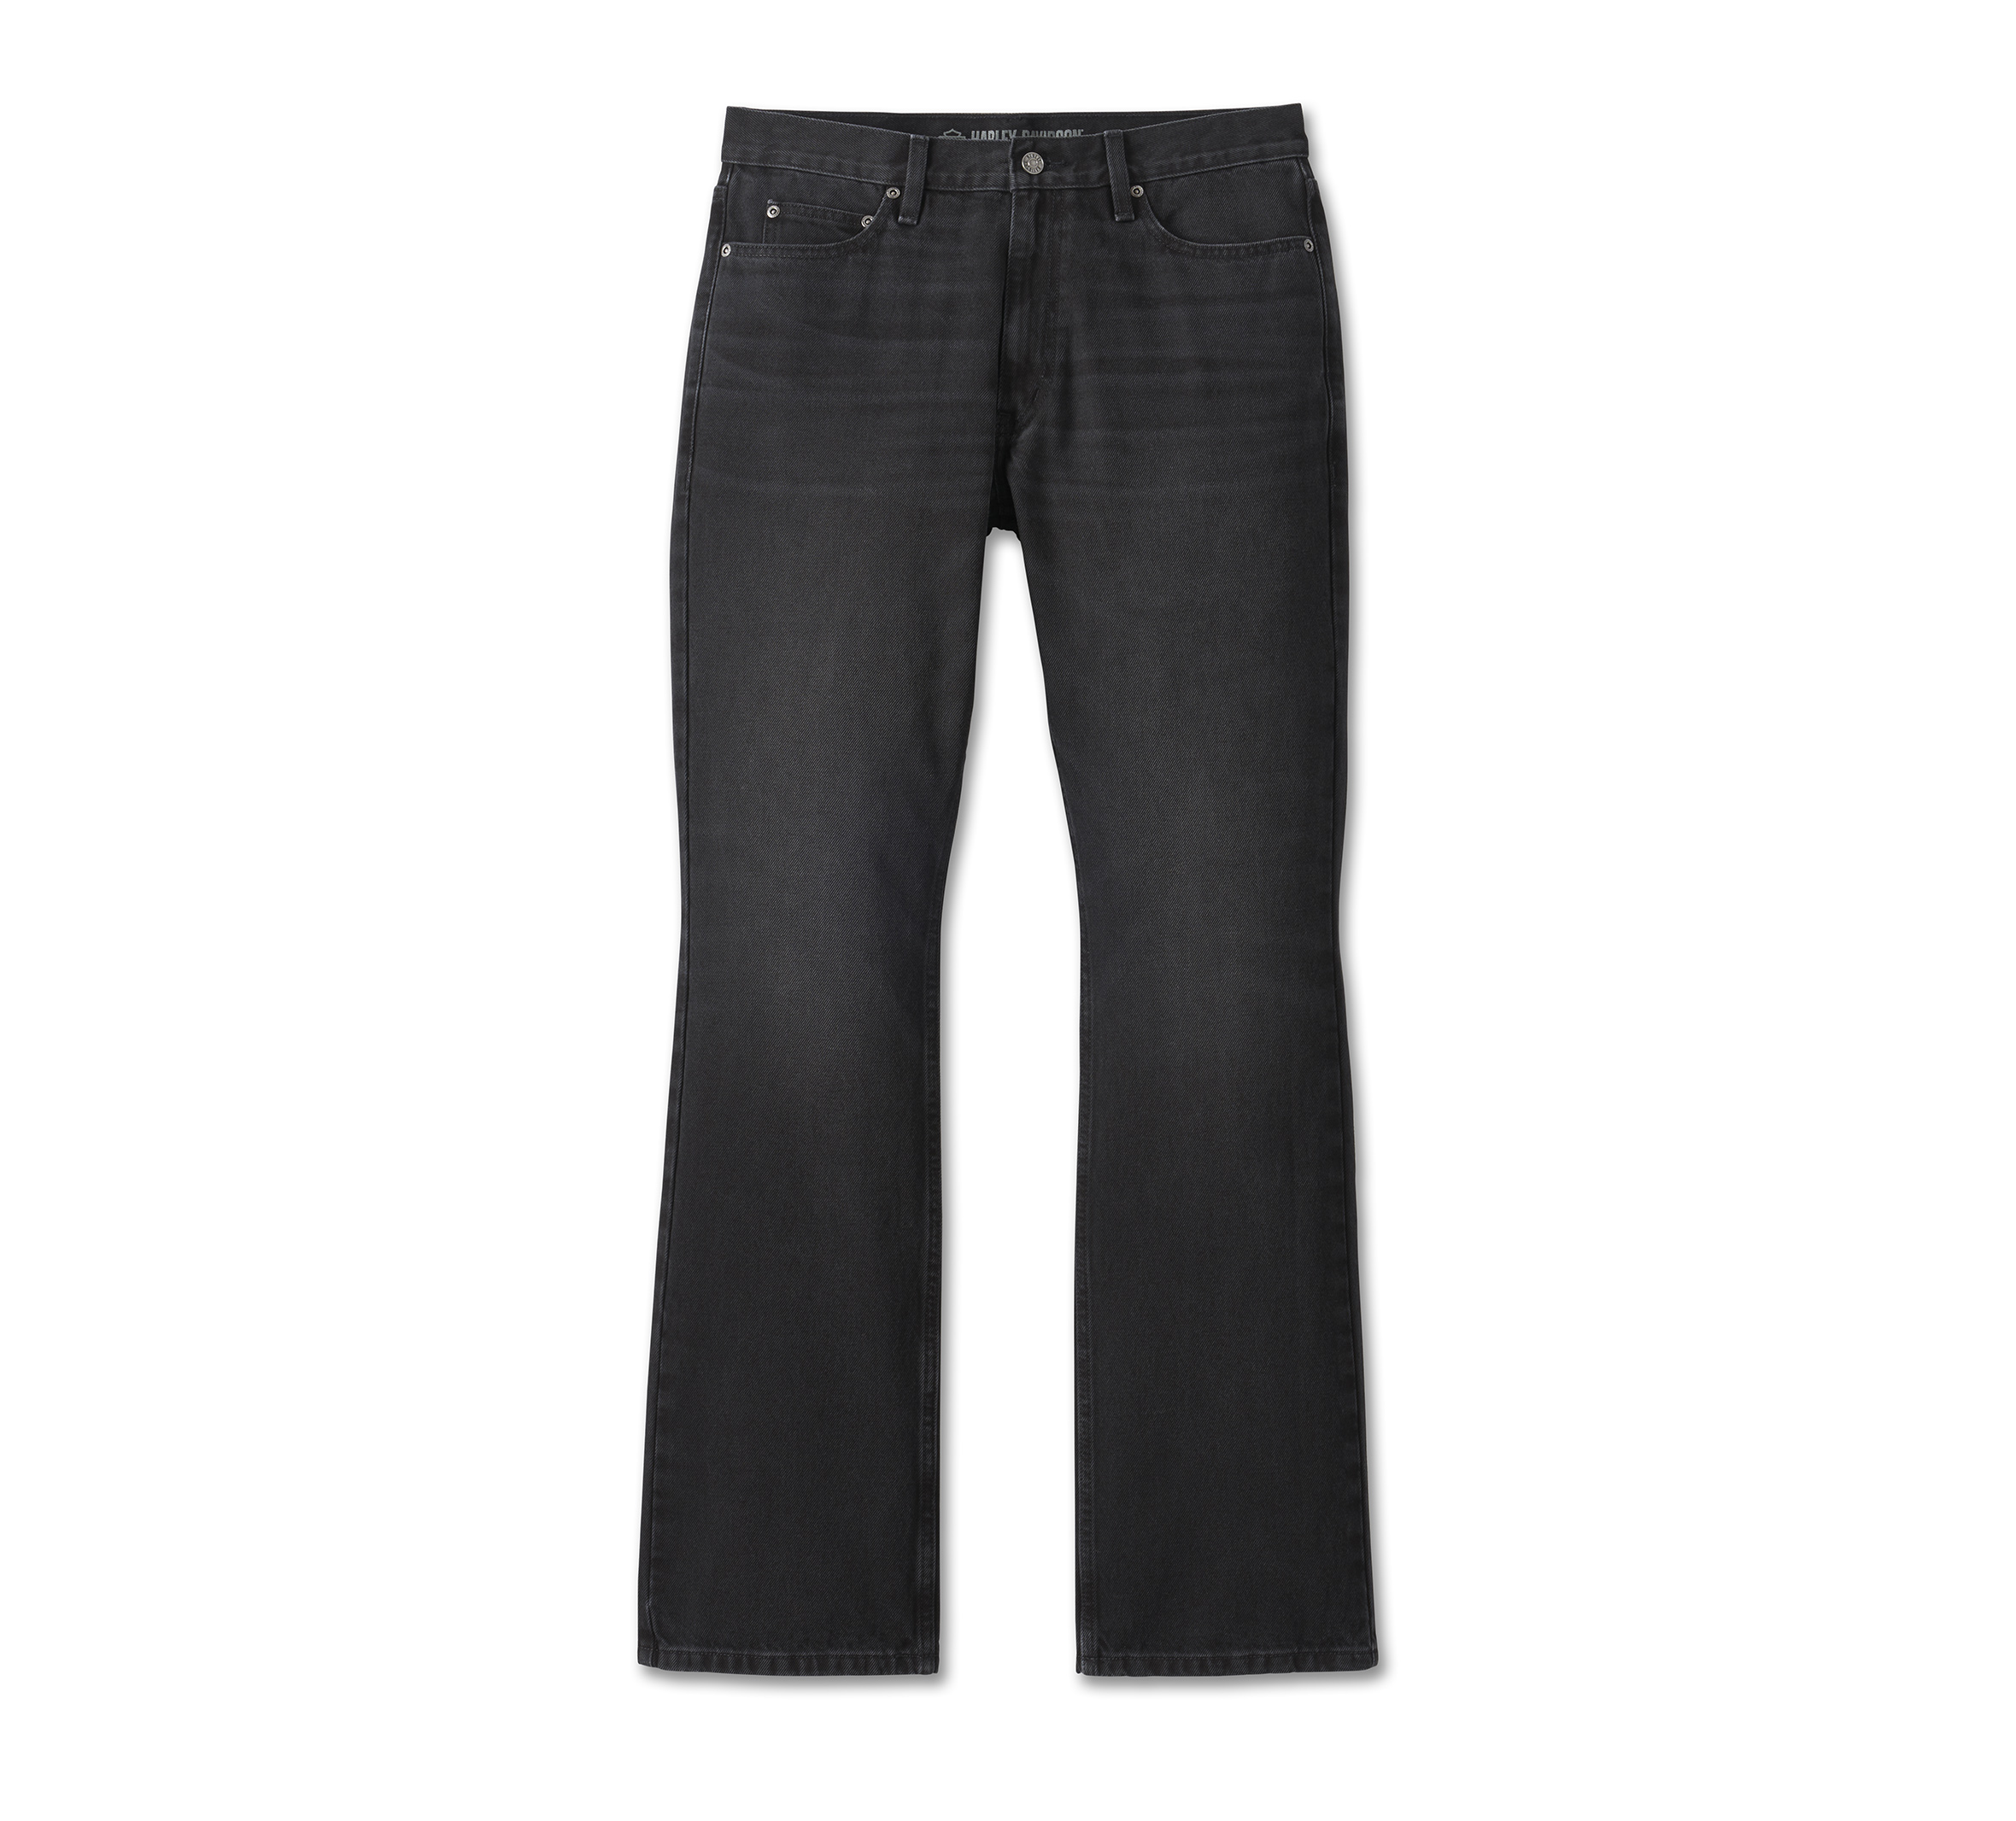 Express Happy Boot Cut Jeans for Women